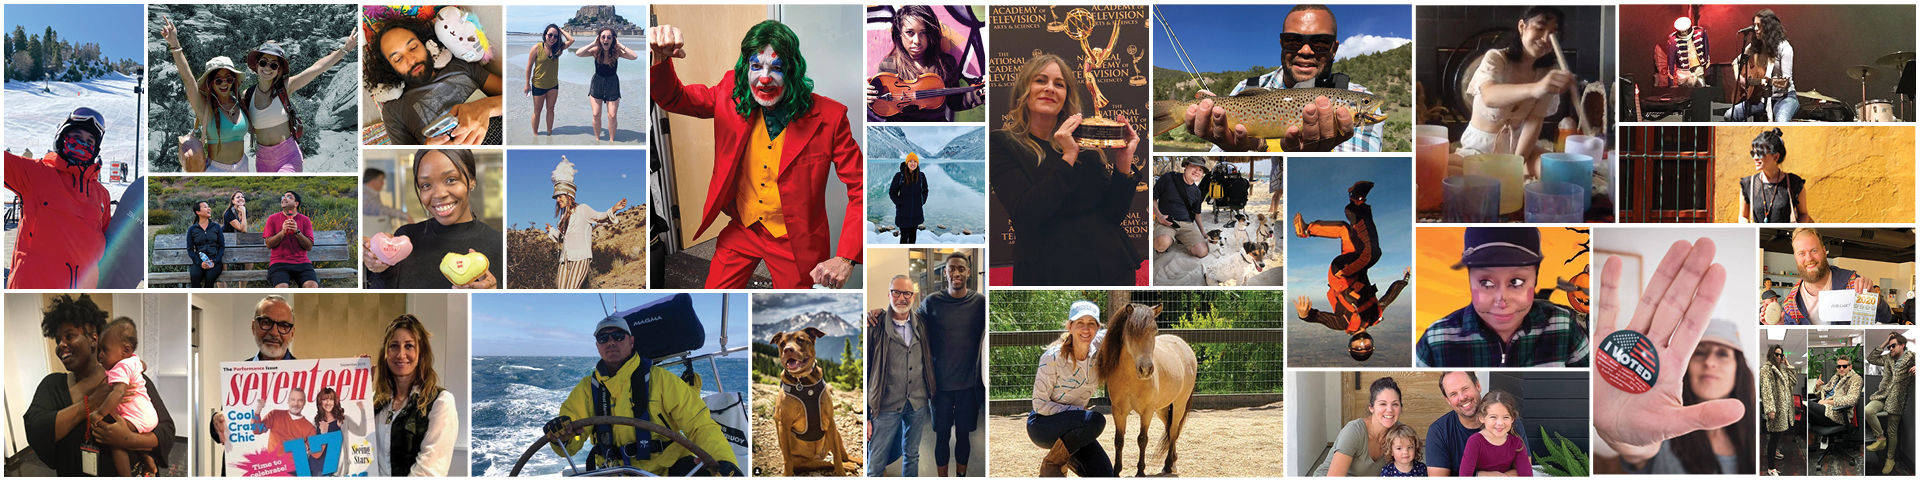 Montage of agency life at Quigley featuring exotic location shoots, remote work and office events